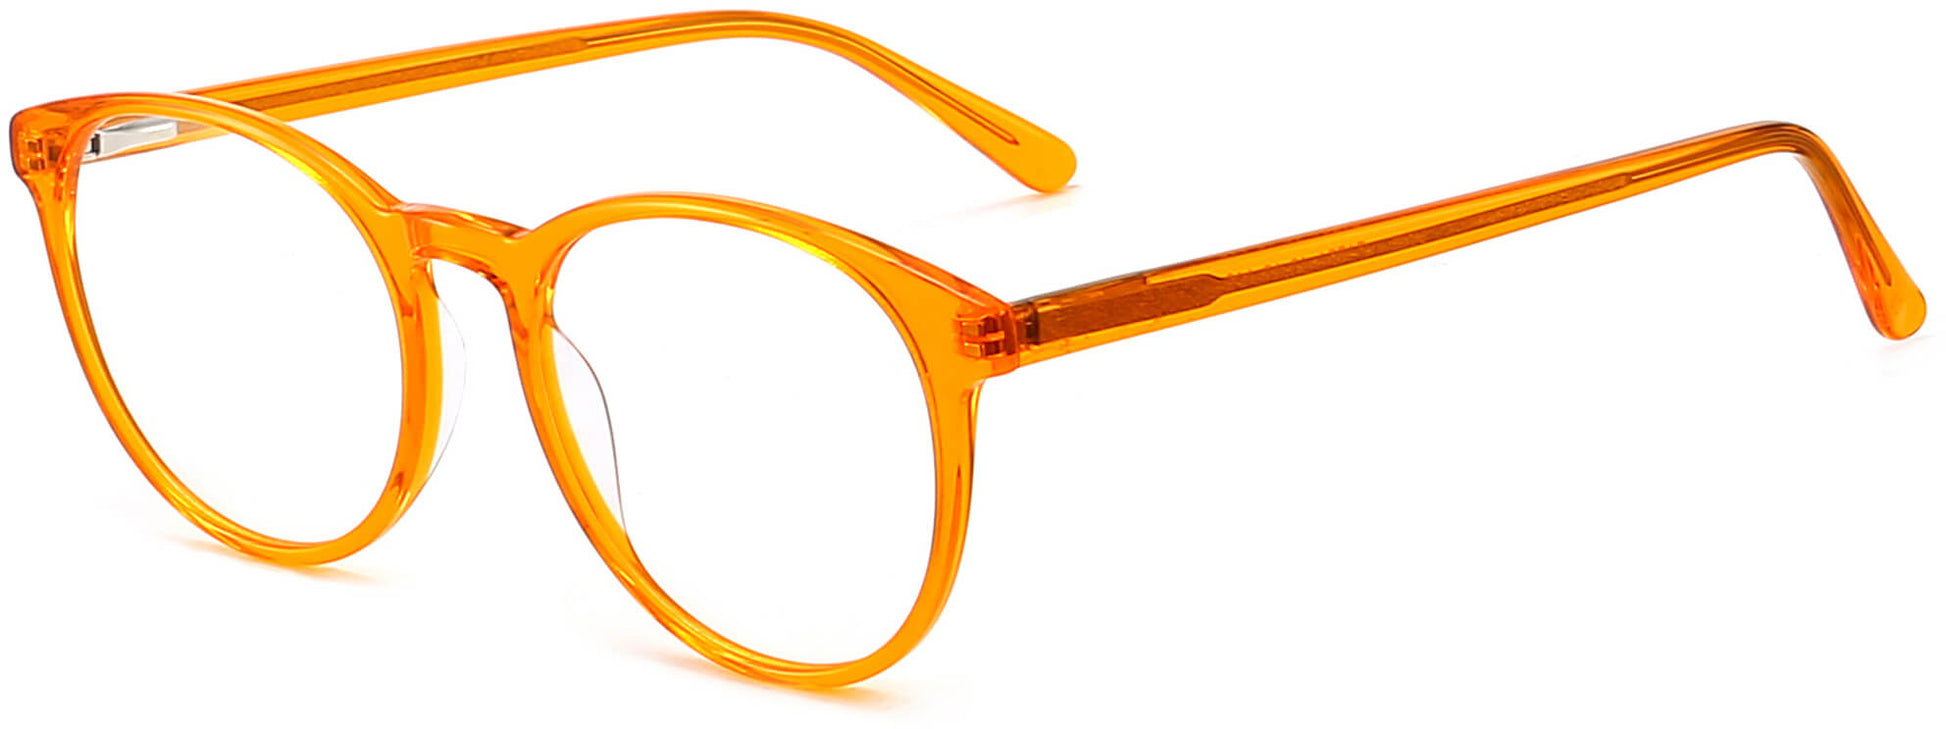 Mellyn round orange Eyeglasses from ANRRI, angle view